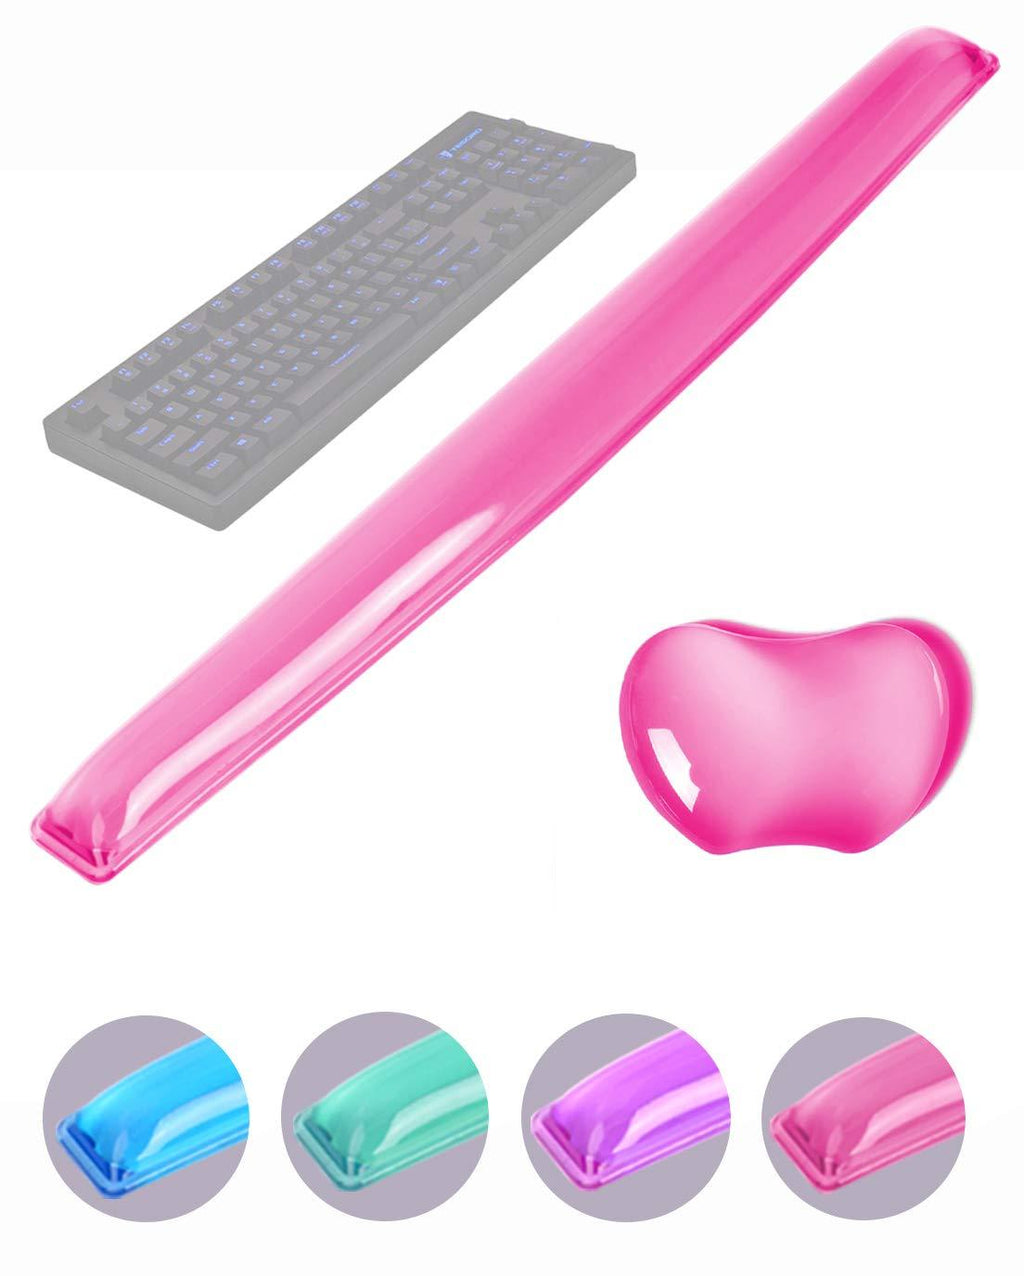 Silicone Gel Keyboard Wrist Rest Set Plus Keyboard & Mouse Wrist Support Pad Office, Computer, Laptop, Mac - Durable, Comfortable and Pain Relief - Pink Set Pink Wrist Rest Set-plus-(New Upgrade Packaging) - LeoForward Australia